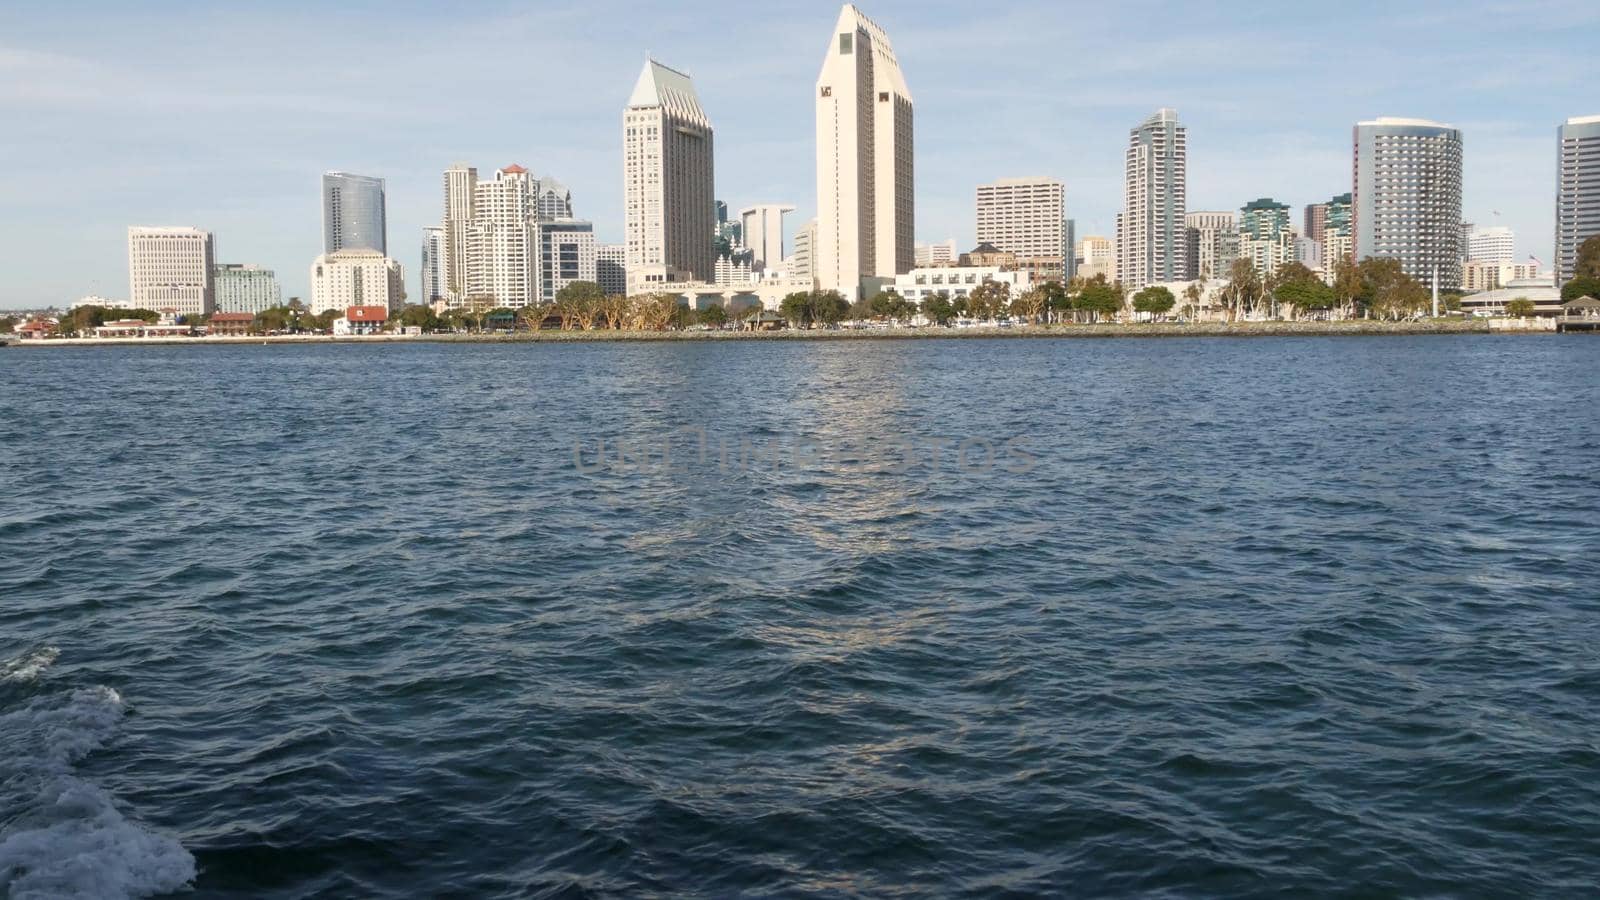 Metropolis urban skyline, highrise skyscrapers of city downtown, San Diego Bay, California USA. Waterfront buildings near pacific ocean harbour. View from boat, nautical public transport to Coronado by DogoraSun